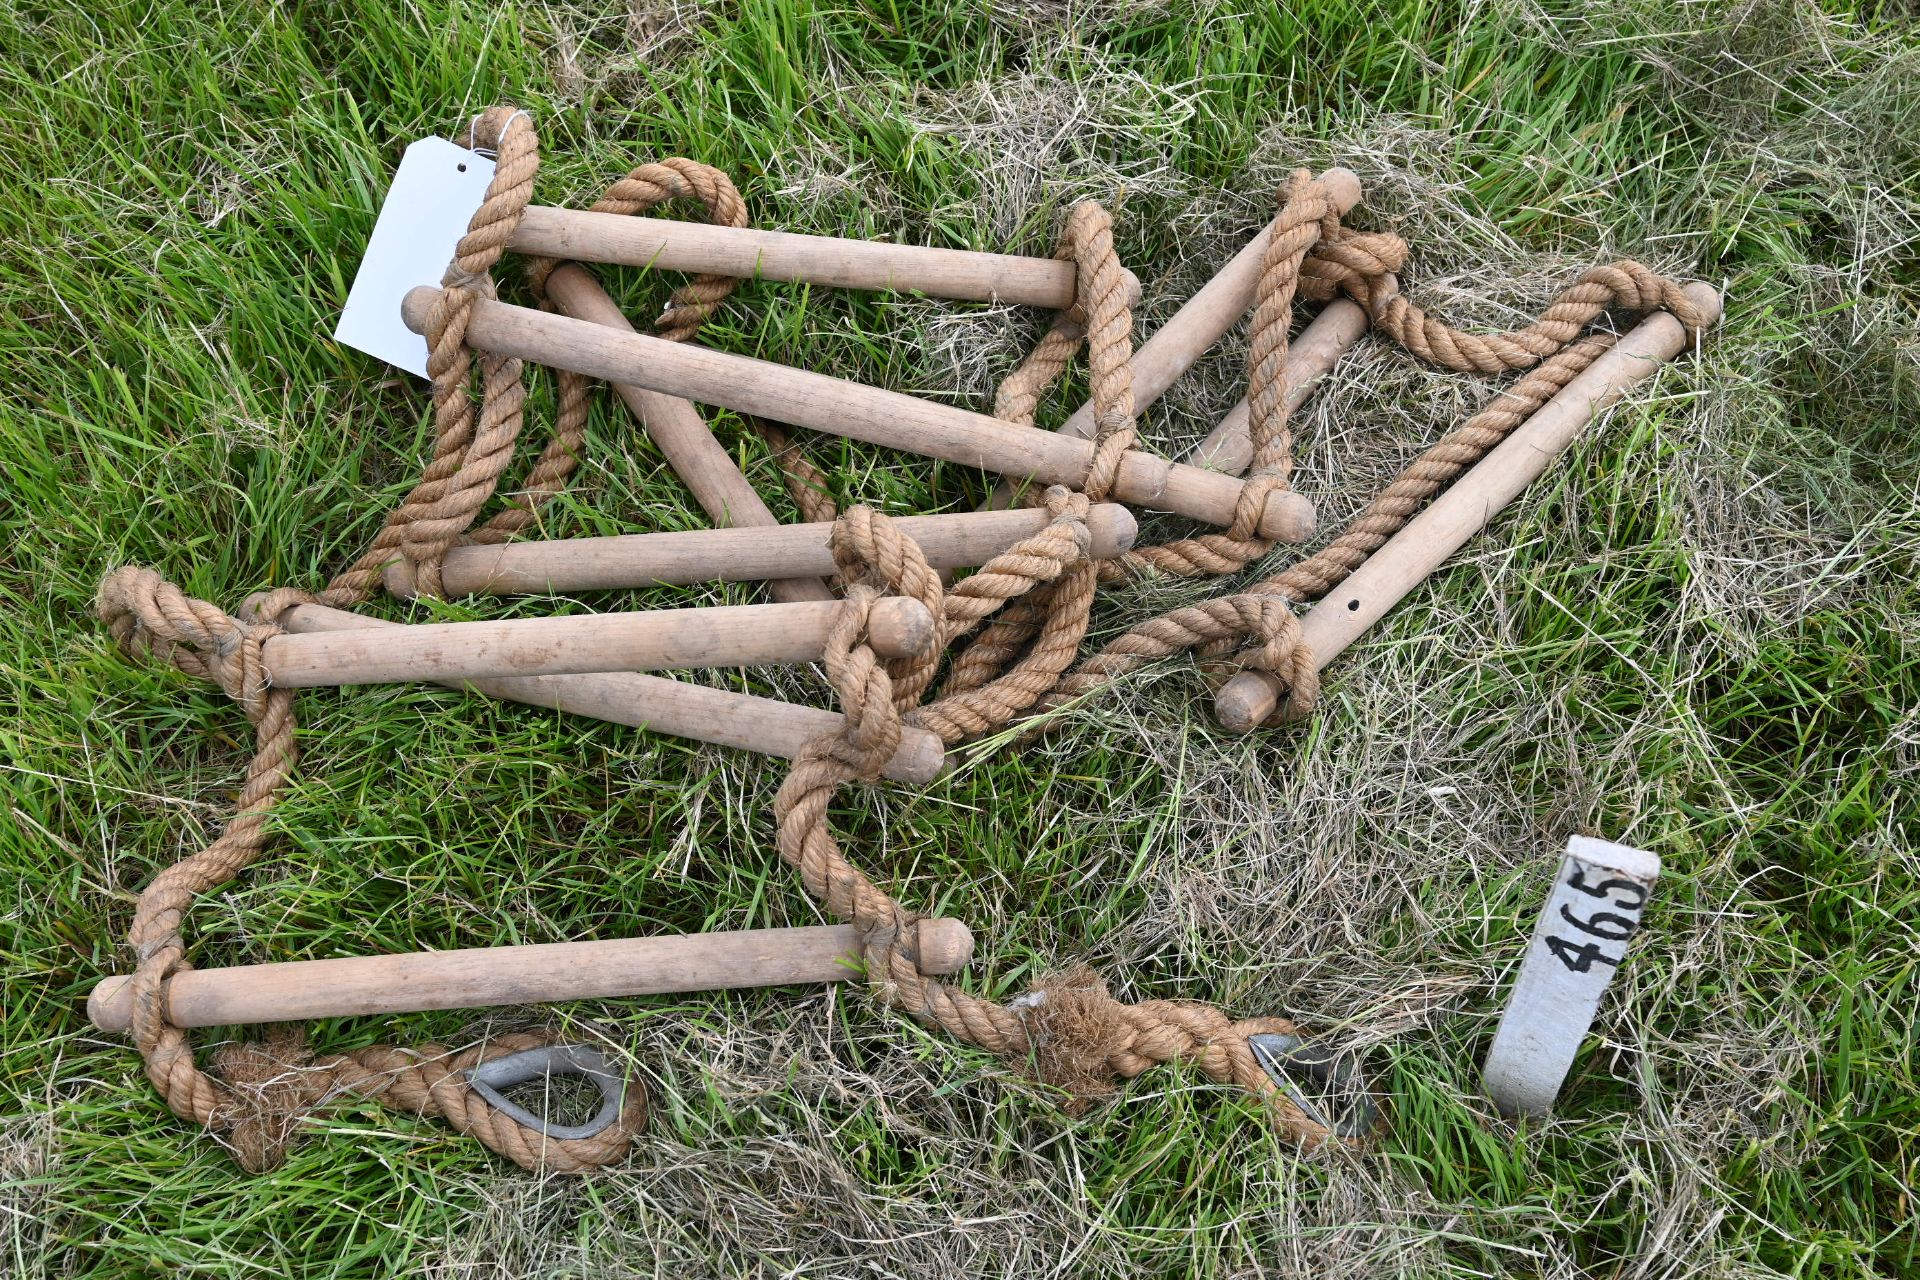 A rope ladder